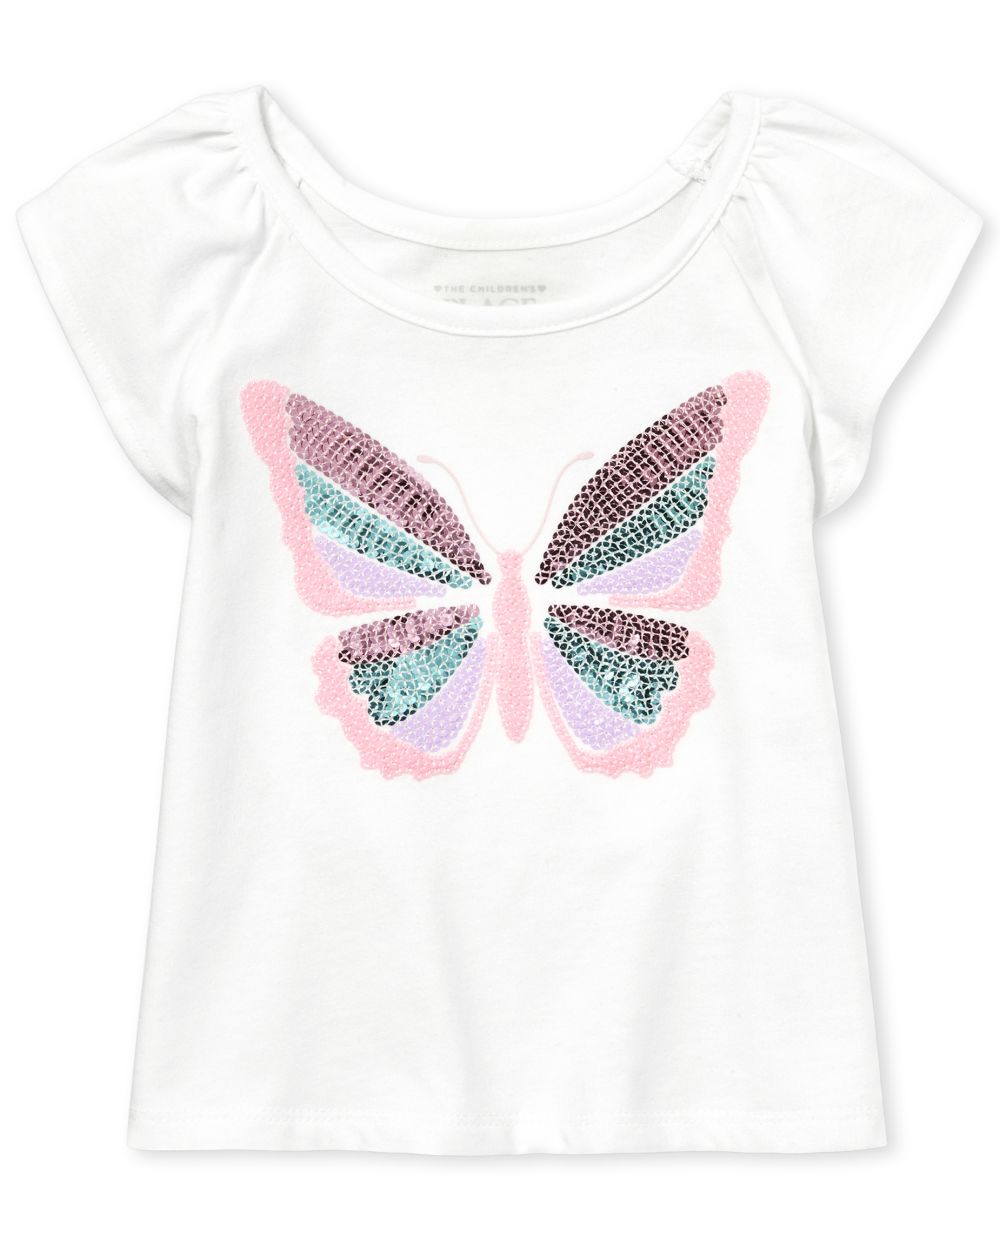 Baby And Toddler Girls Short Sleeve Embellished Graphic Top